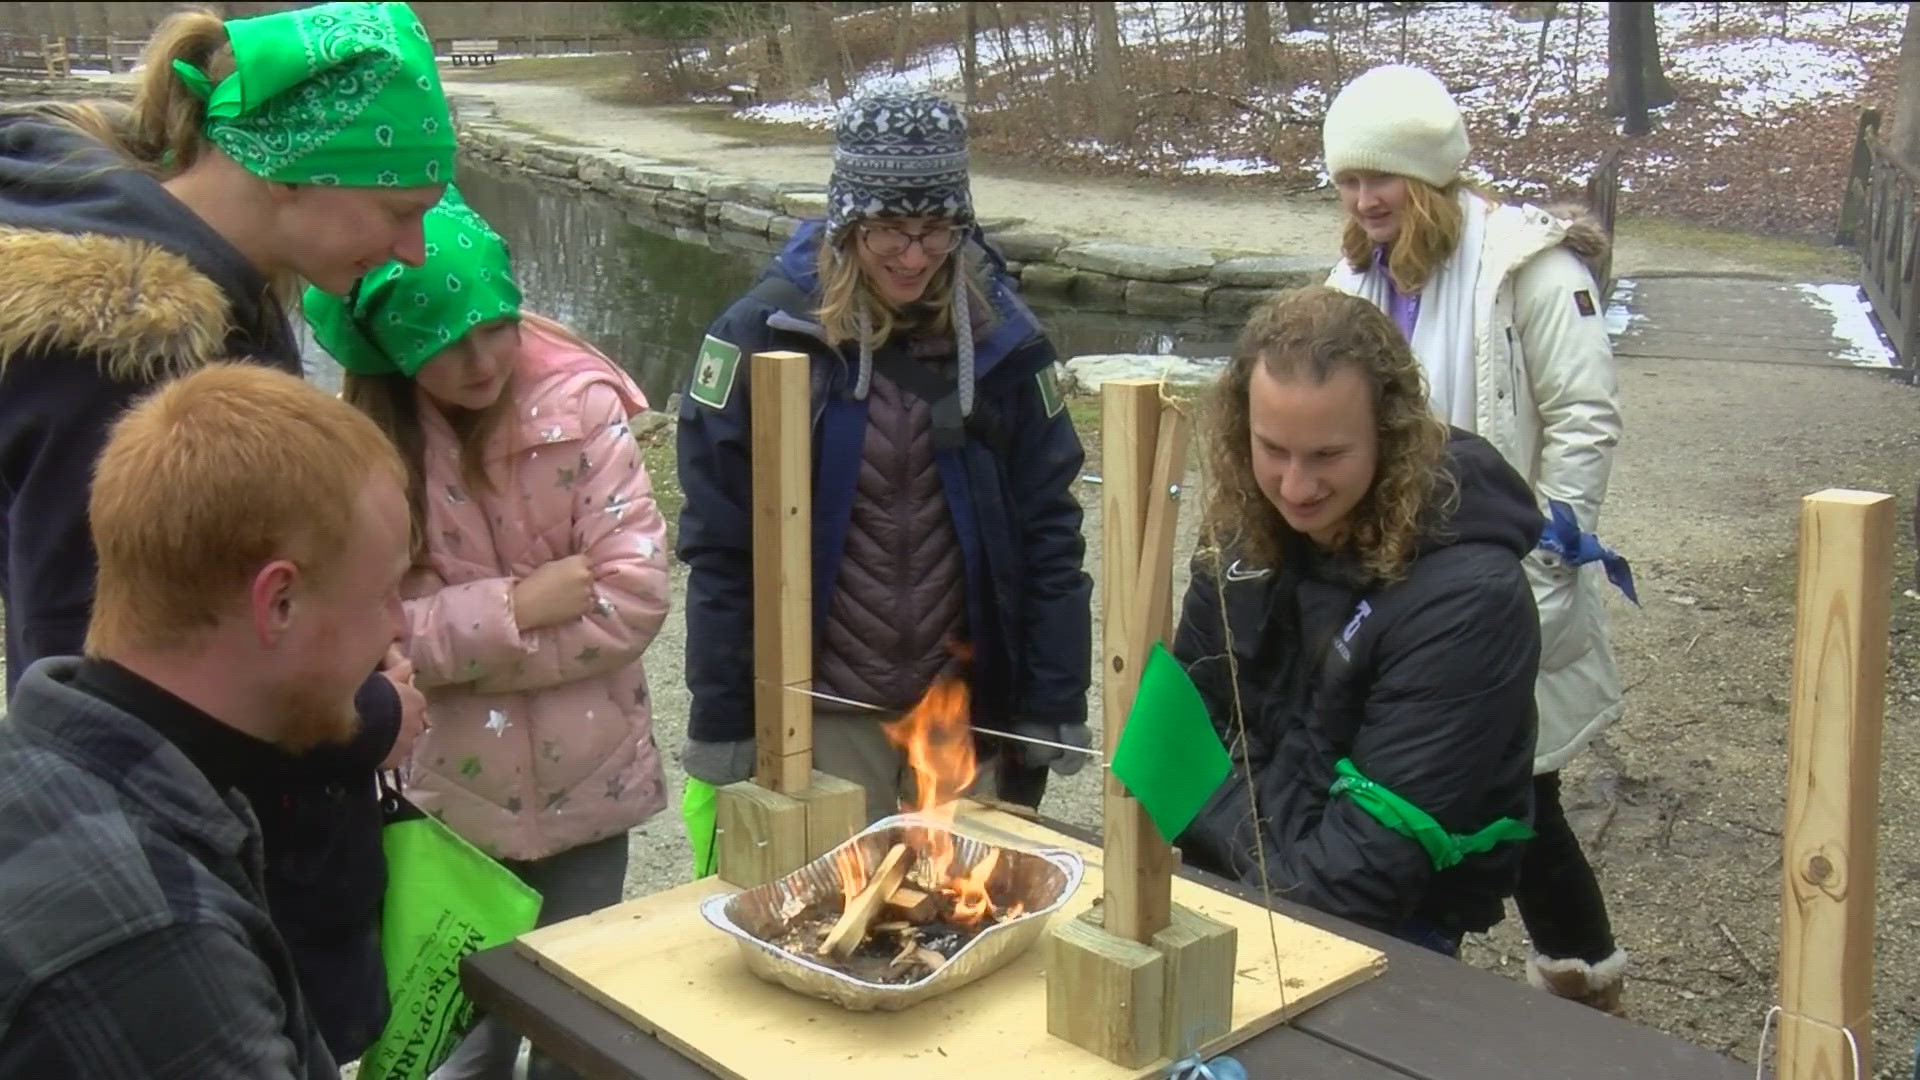 Teams (or tribes) of 2 to 5 people competed in a series of wilderness survival challenges.